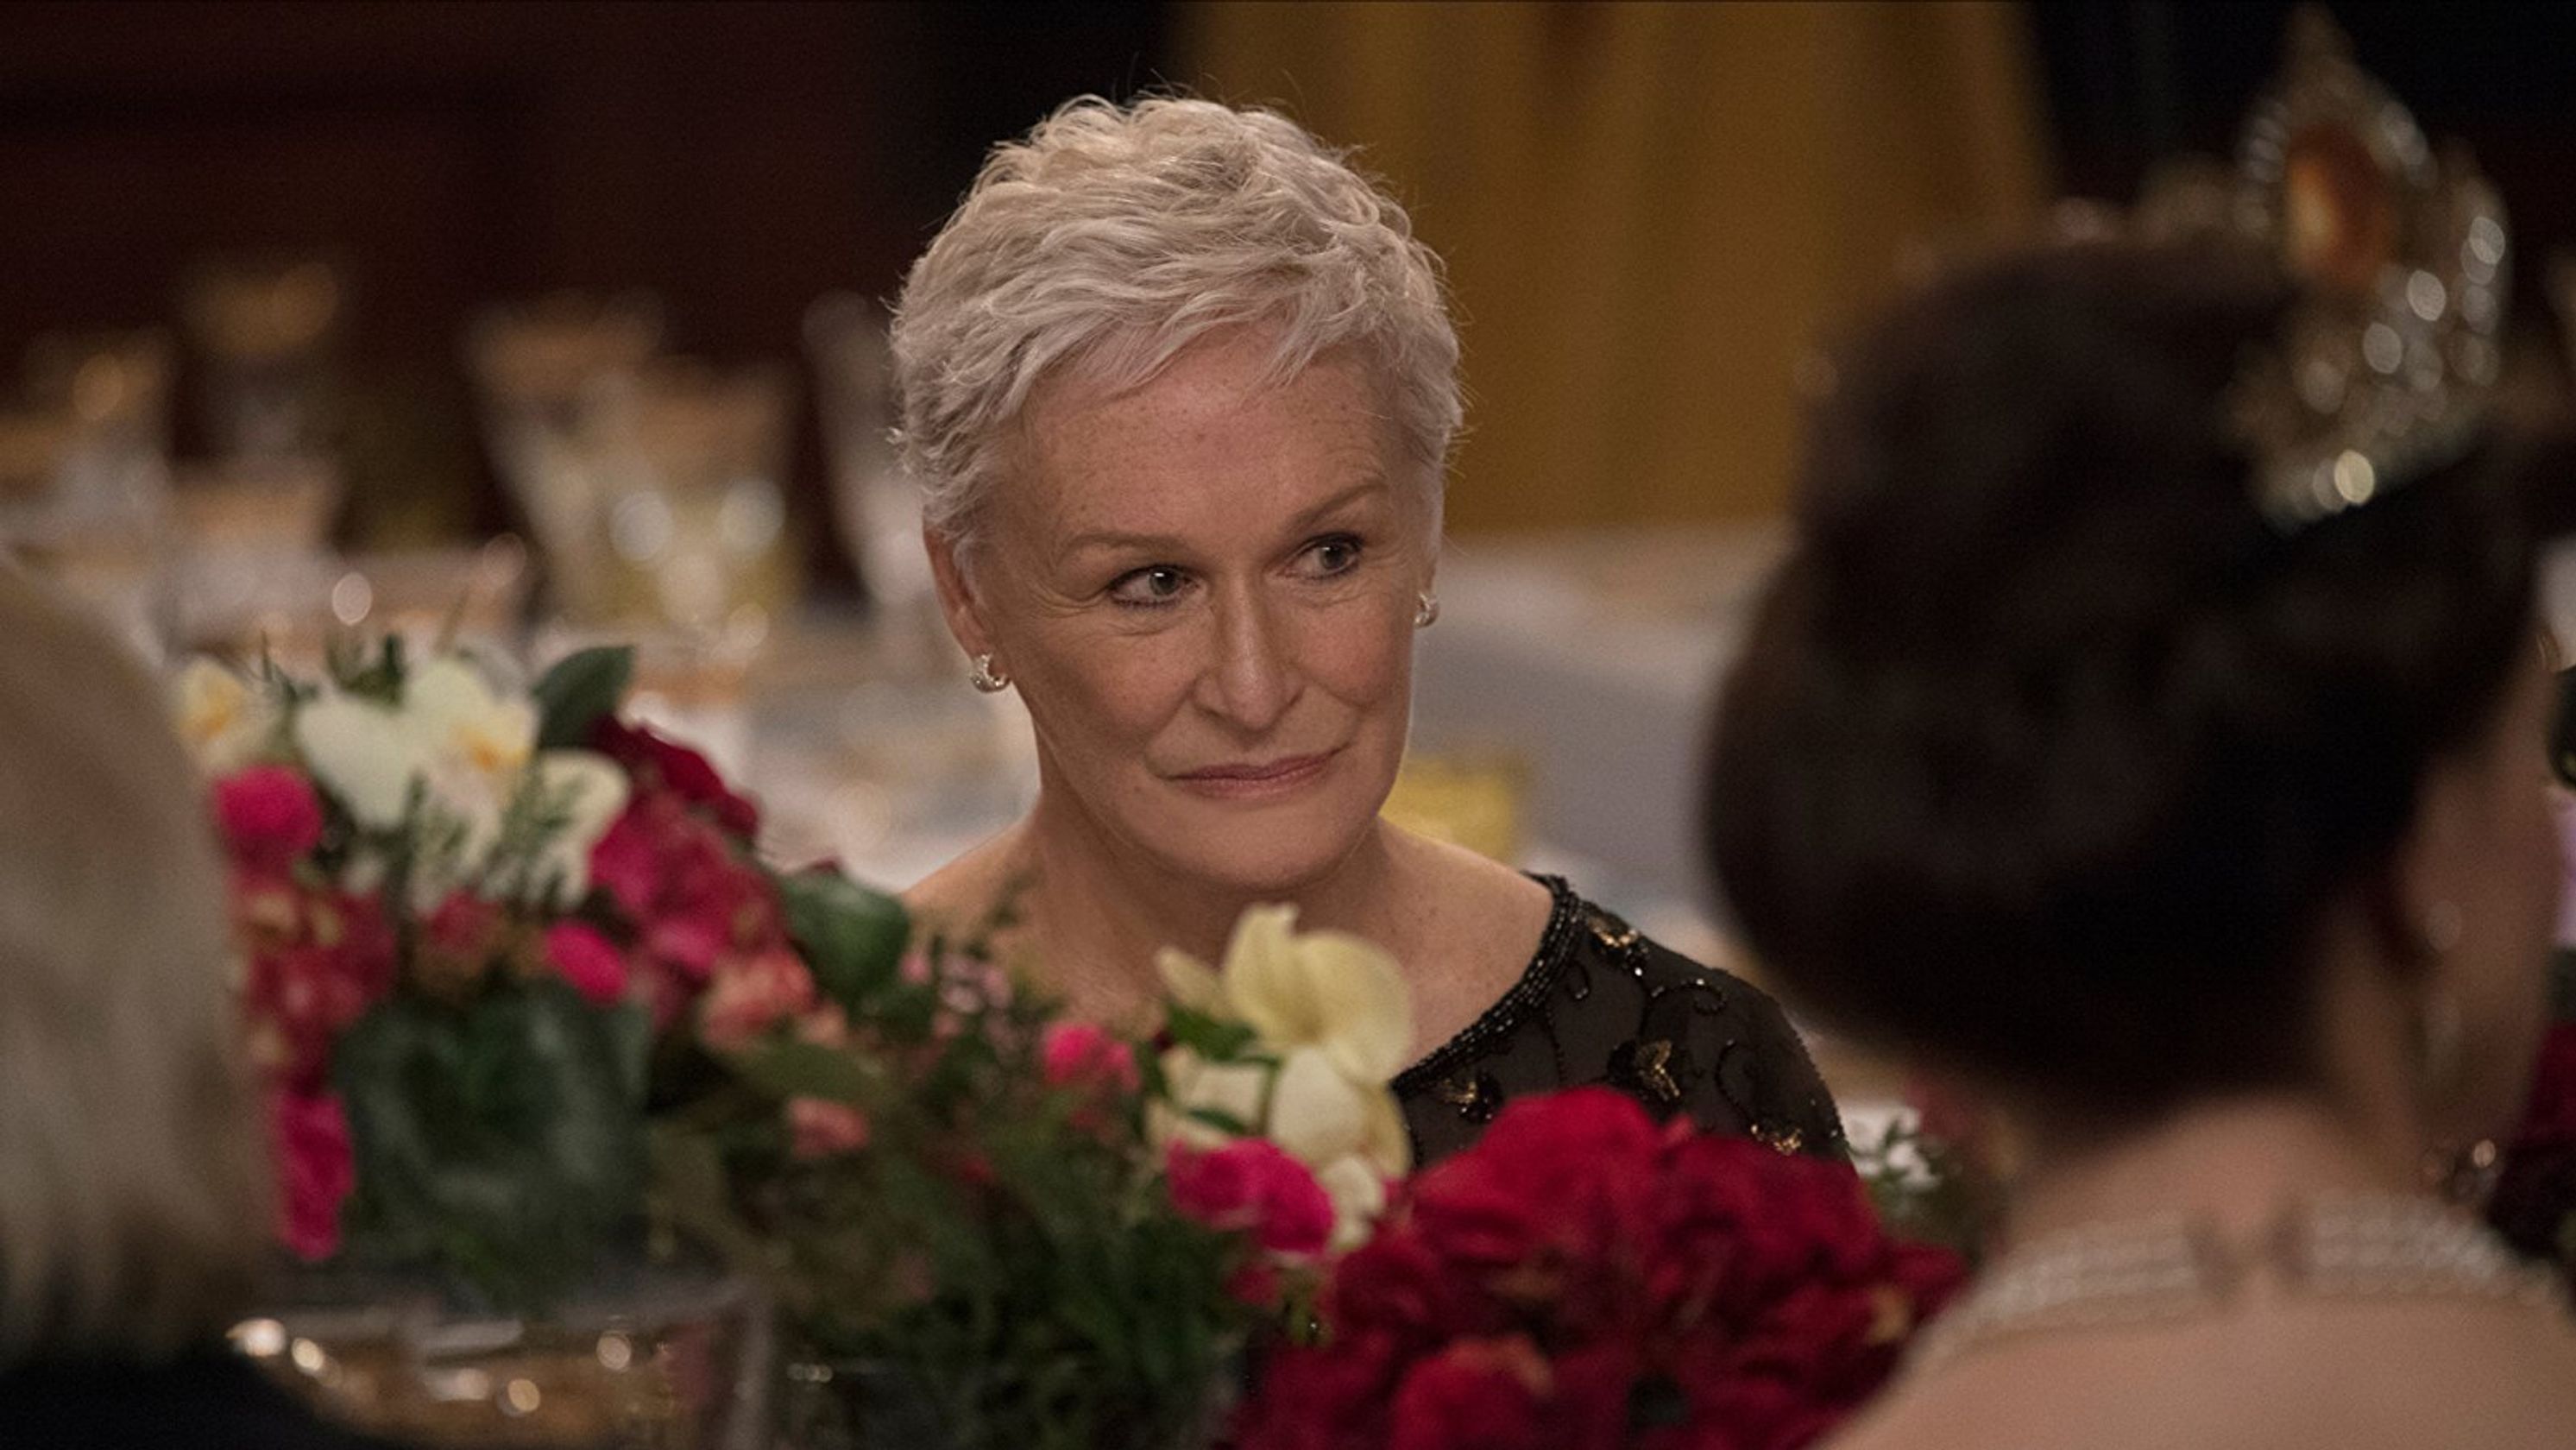 Review: Nominated for Oscars 2019, Glenn Close is astounding in and as The Wife